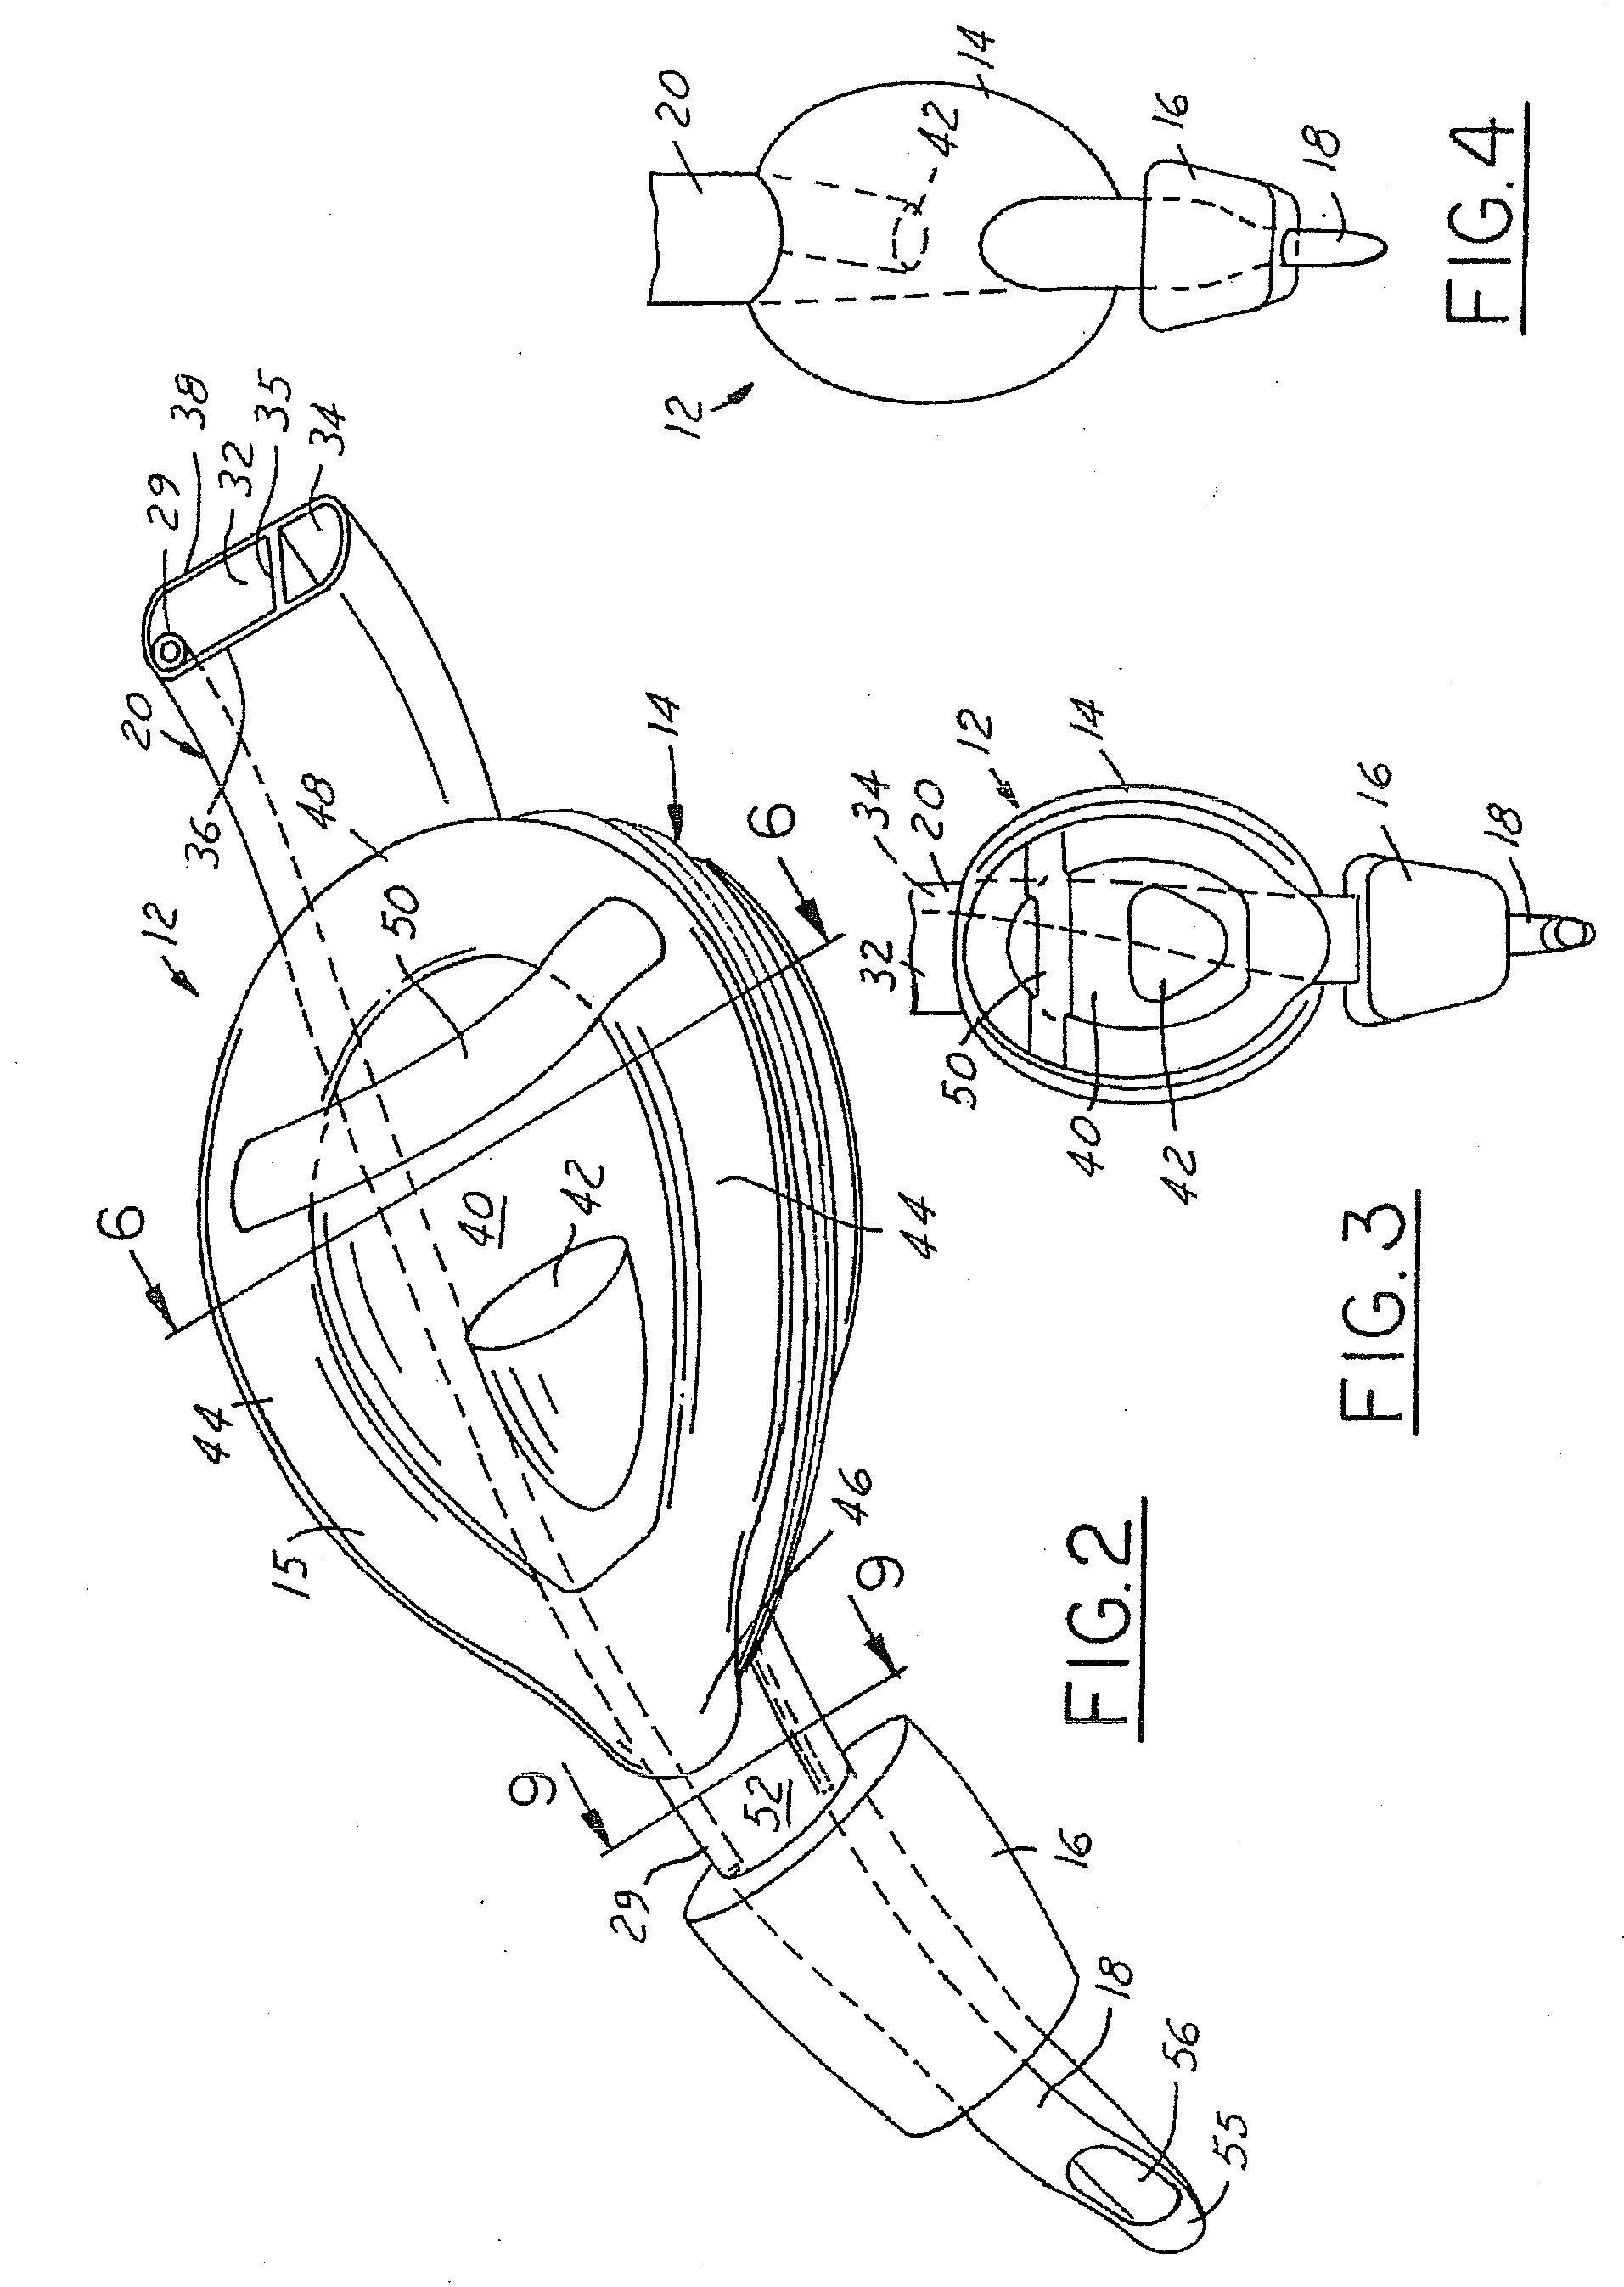 Combination Artificial Airway Device and Esophageal Obturator